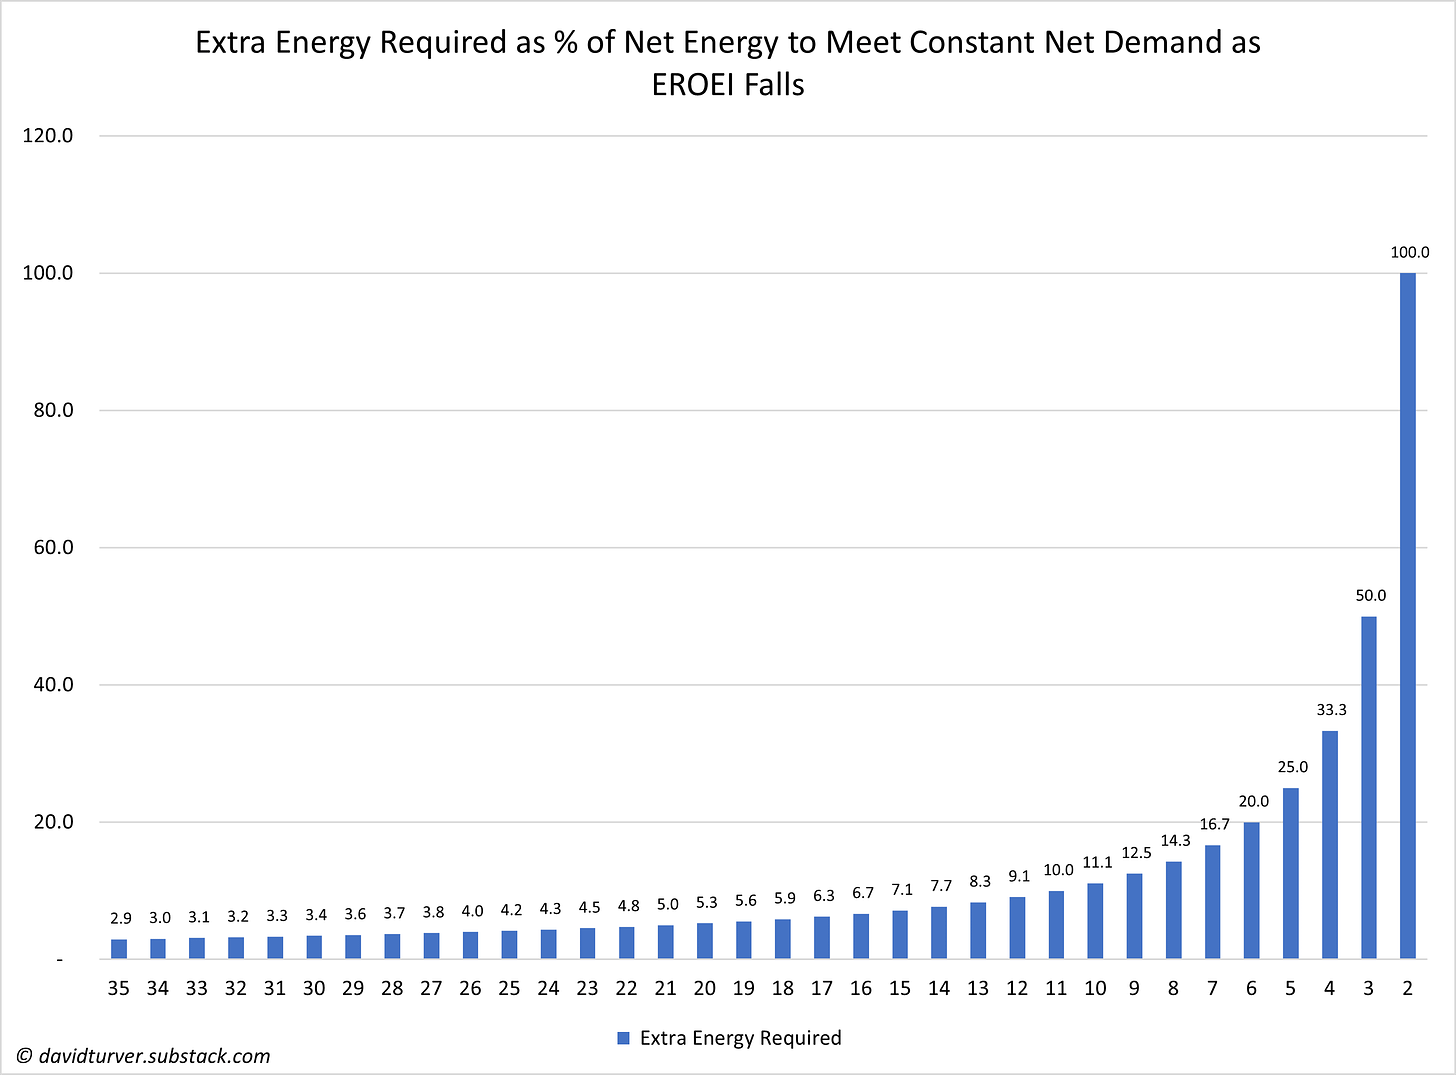 Figure 5 - Gross Energy Mountain Extra Energy Required as a Percentage of Net Energy as EROEI falls